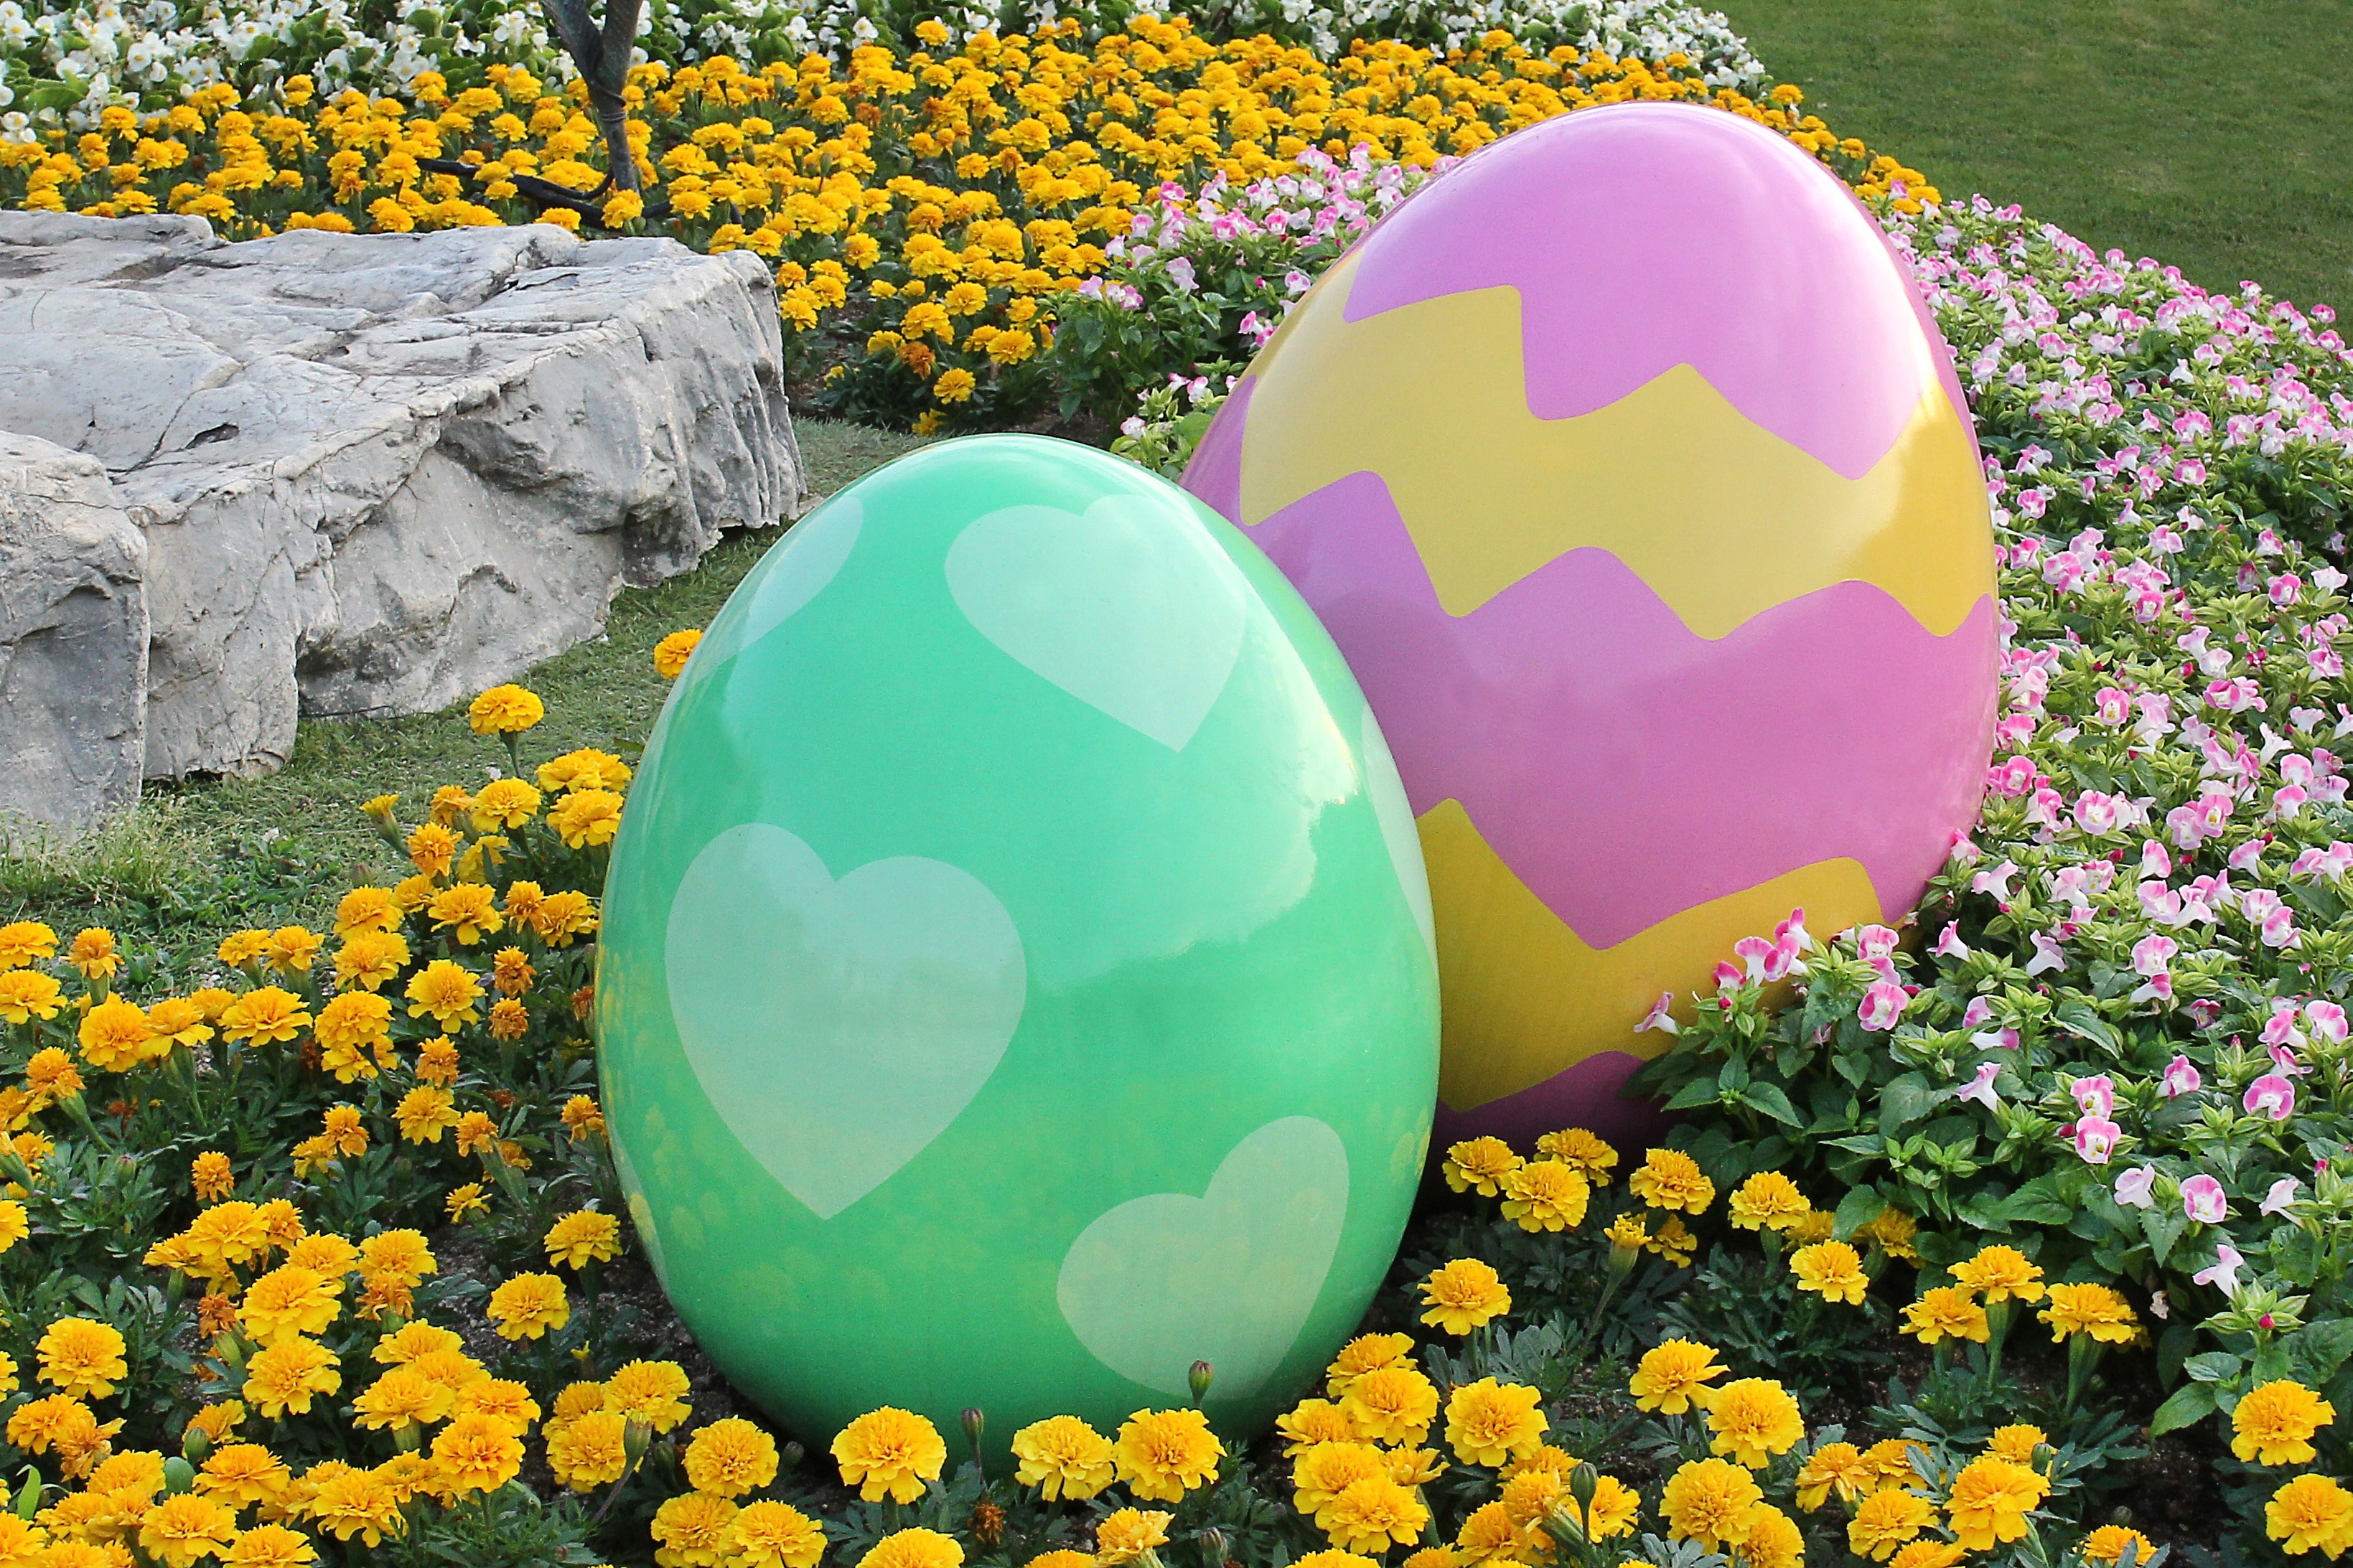 green heart designed and pink and yellow chevron easter eggs